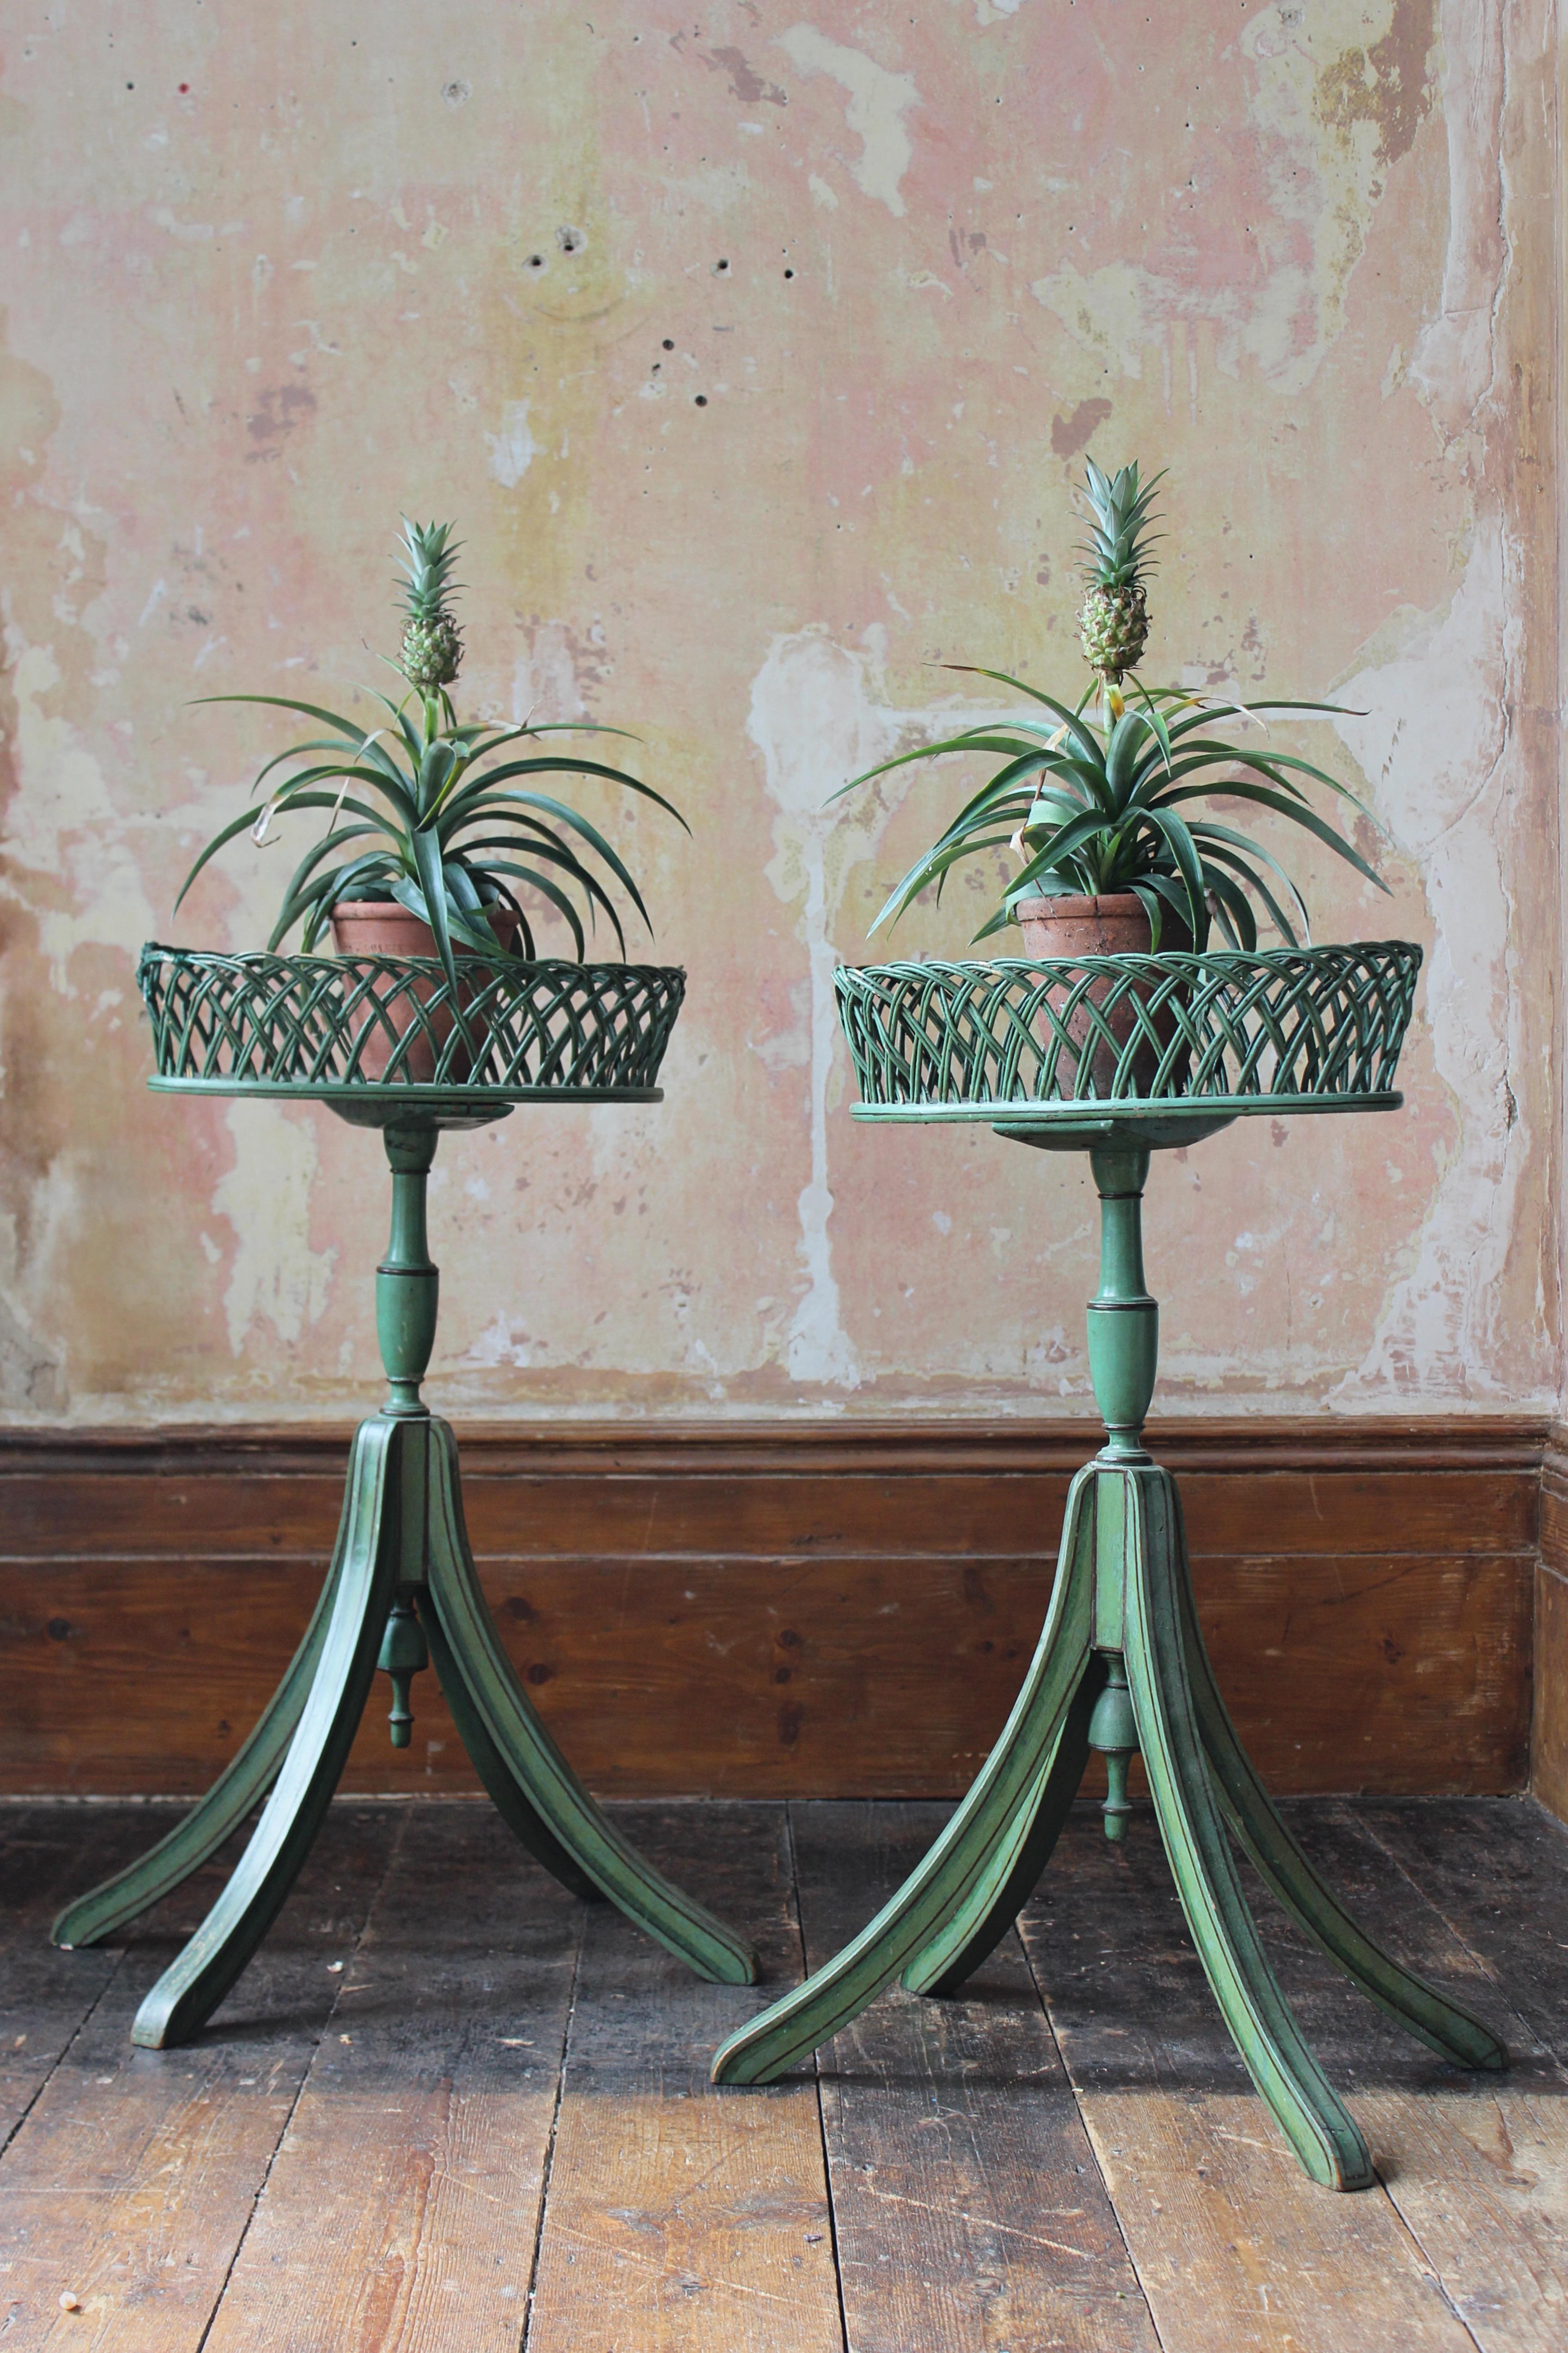 A pair of mid 20th century pine and wicker jardinières, in the Regency style.

The original green paint has some minor discolouration, age related knocks and chips.

Some small areas of loss to the wicker balustrade along with some sympathetic